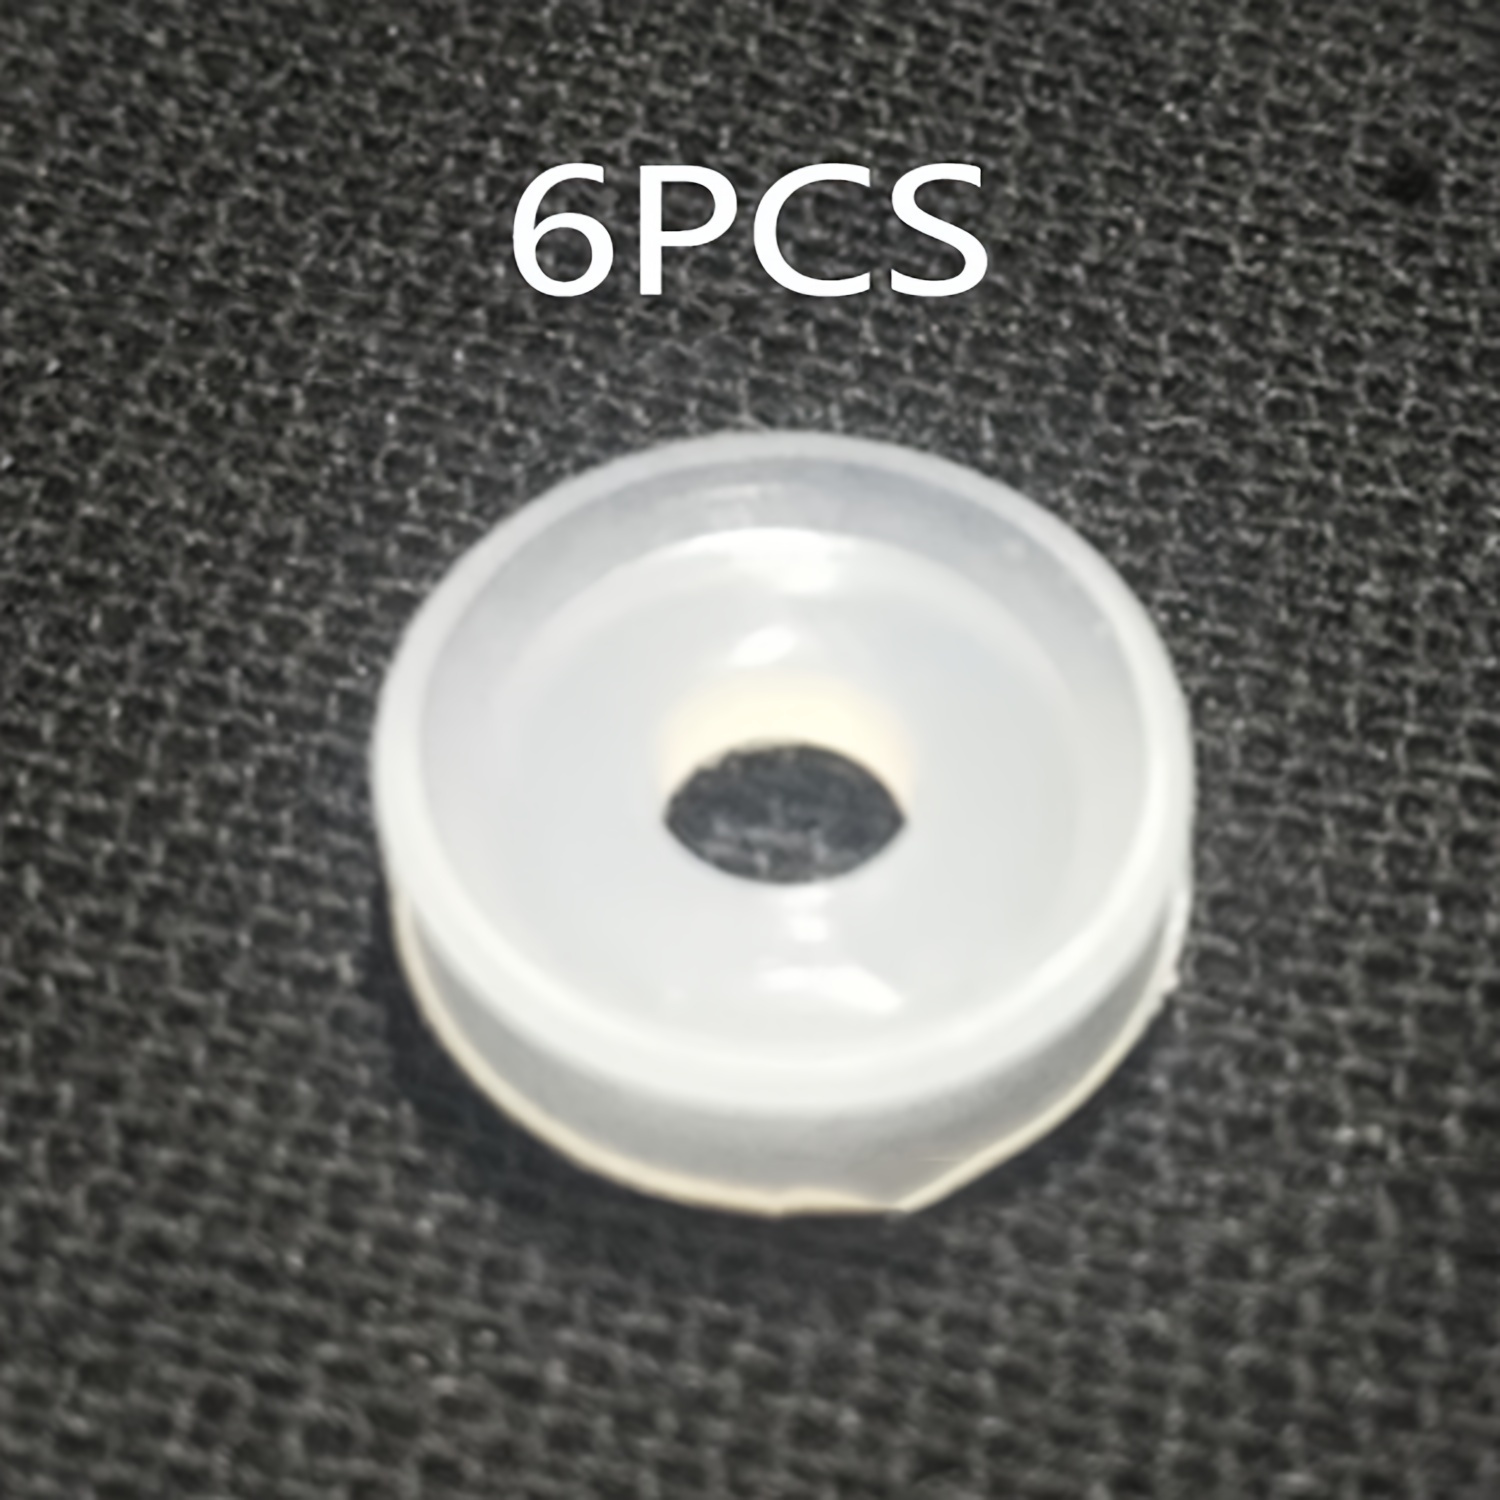 Sealing Ring For Crock Pot Cooker Replacement Silicone Gasket Seal Rings  For Pressure Cooker Crock Pot Accessories Parts - Cookware Parts -  AliExpress